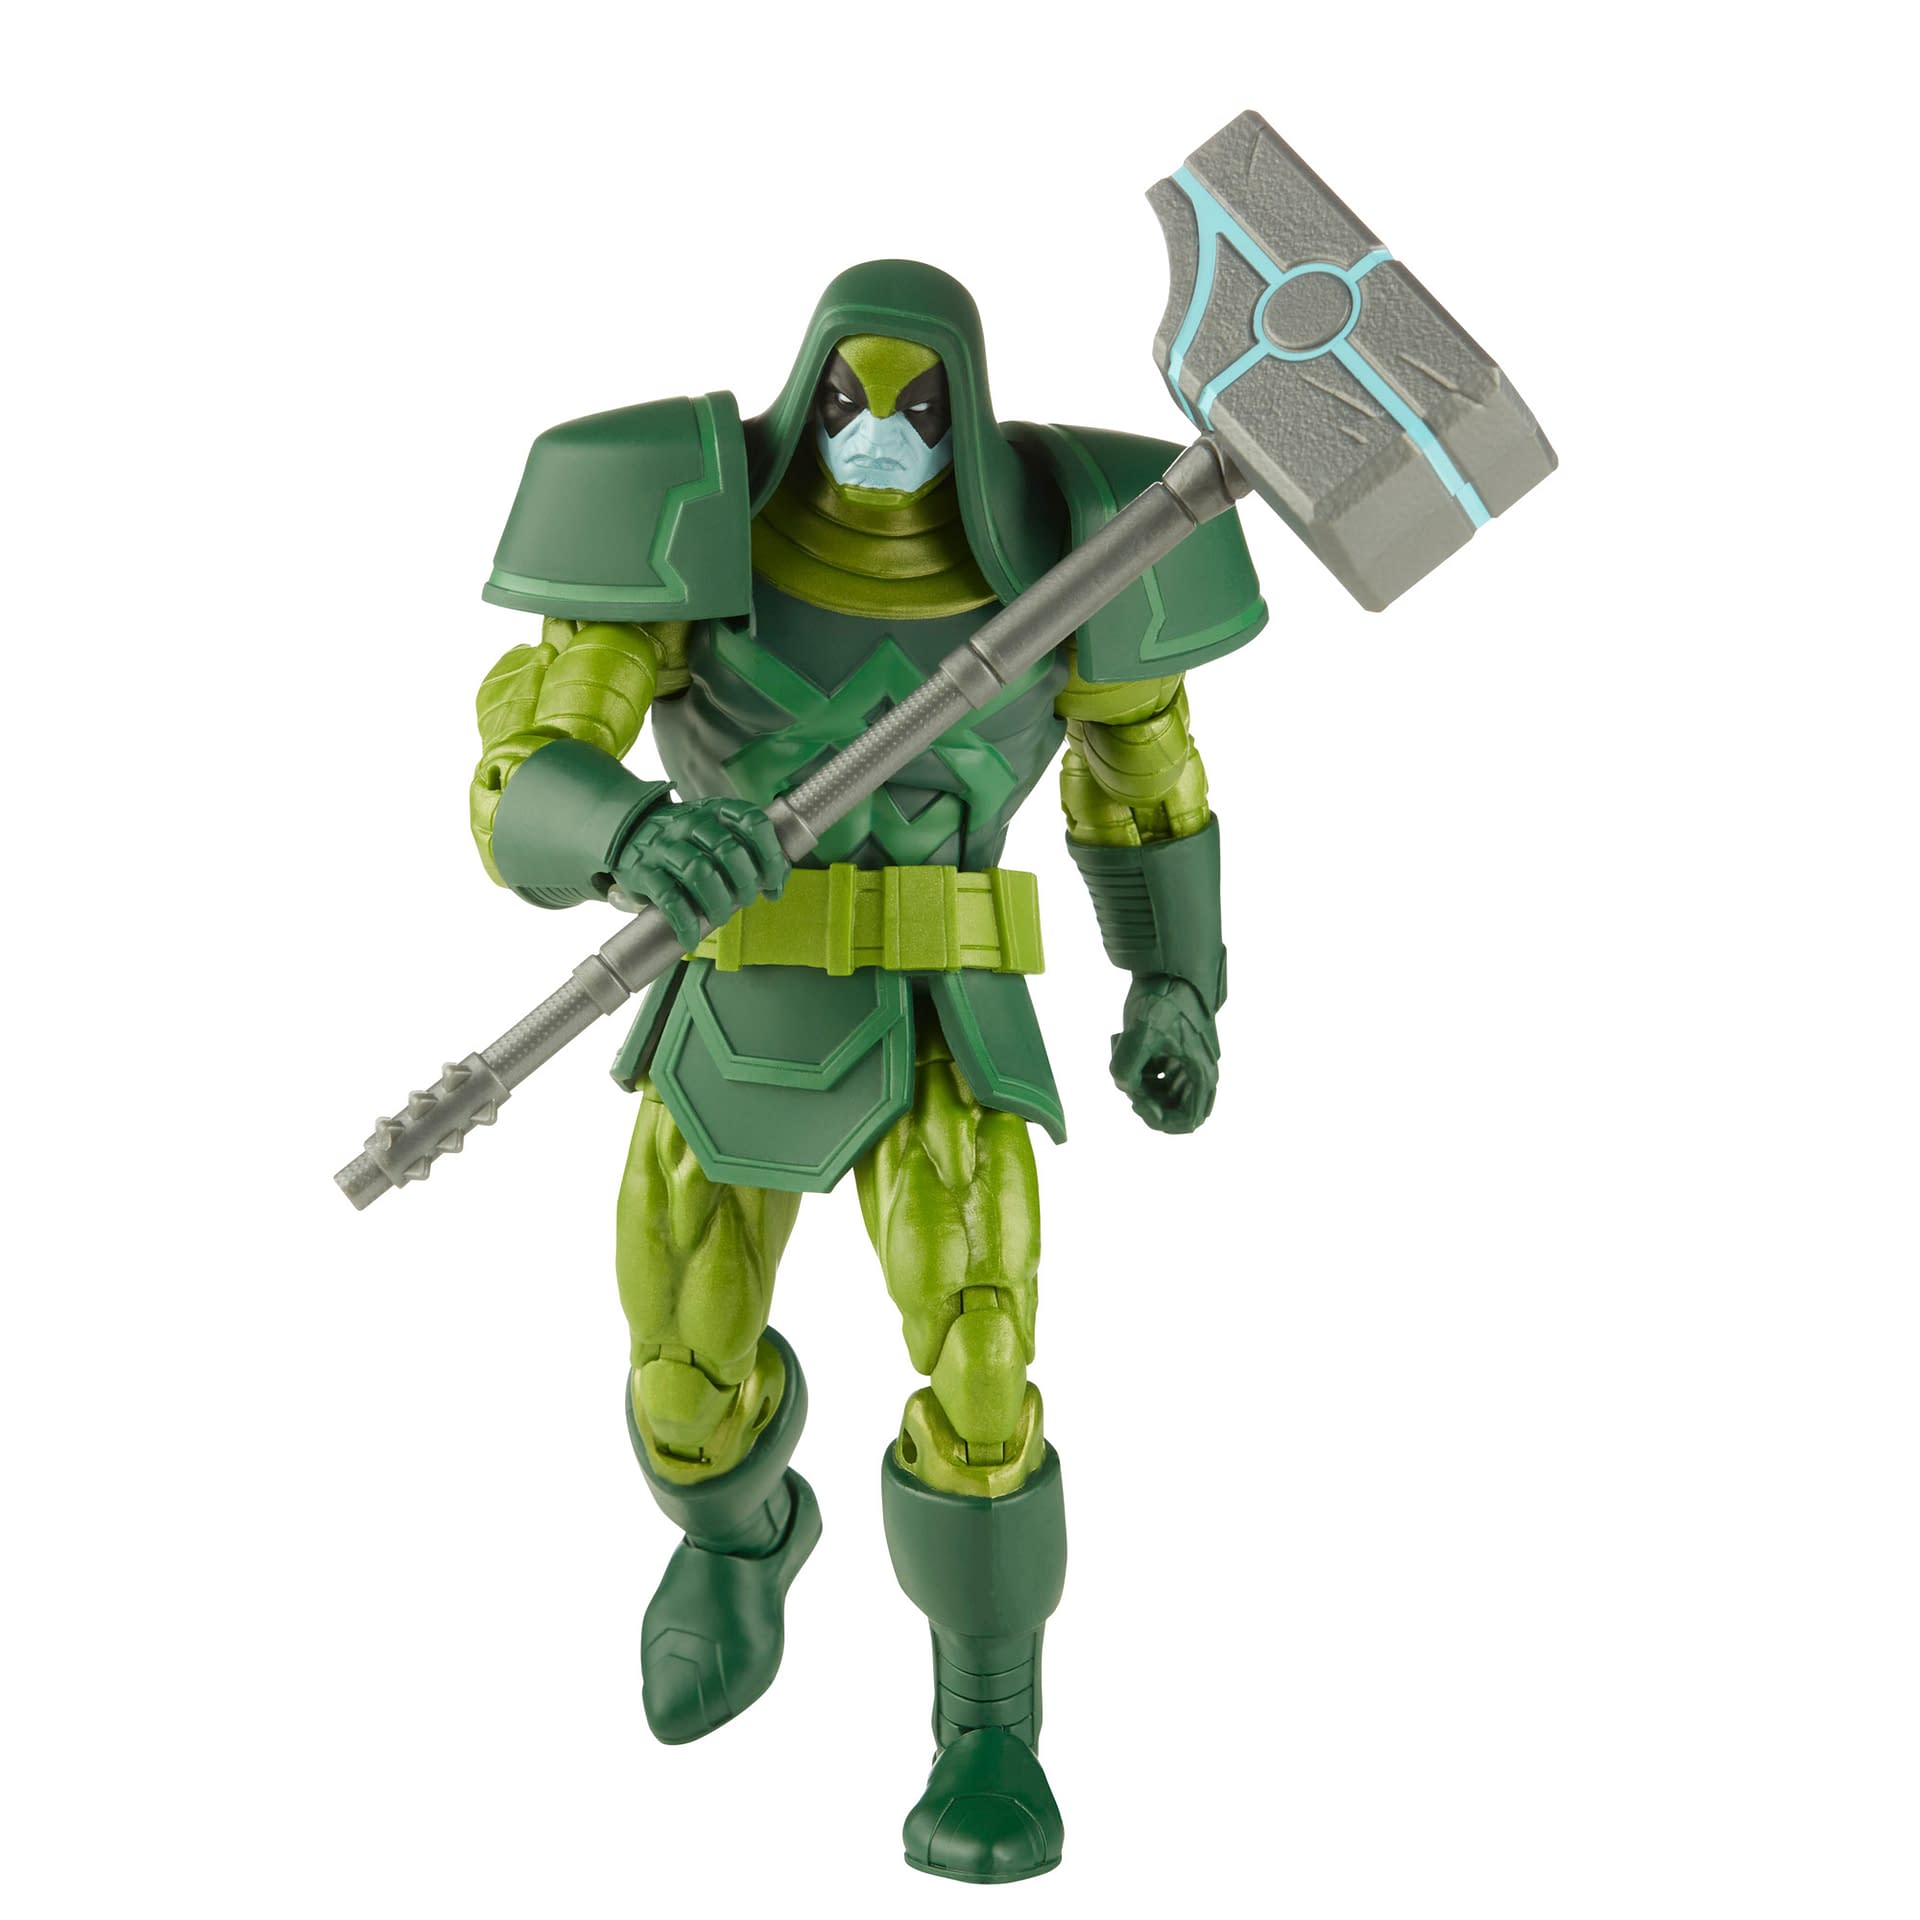 Ronan the Accuser Puts the Hammer Down with Marvel Legends 